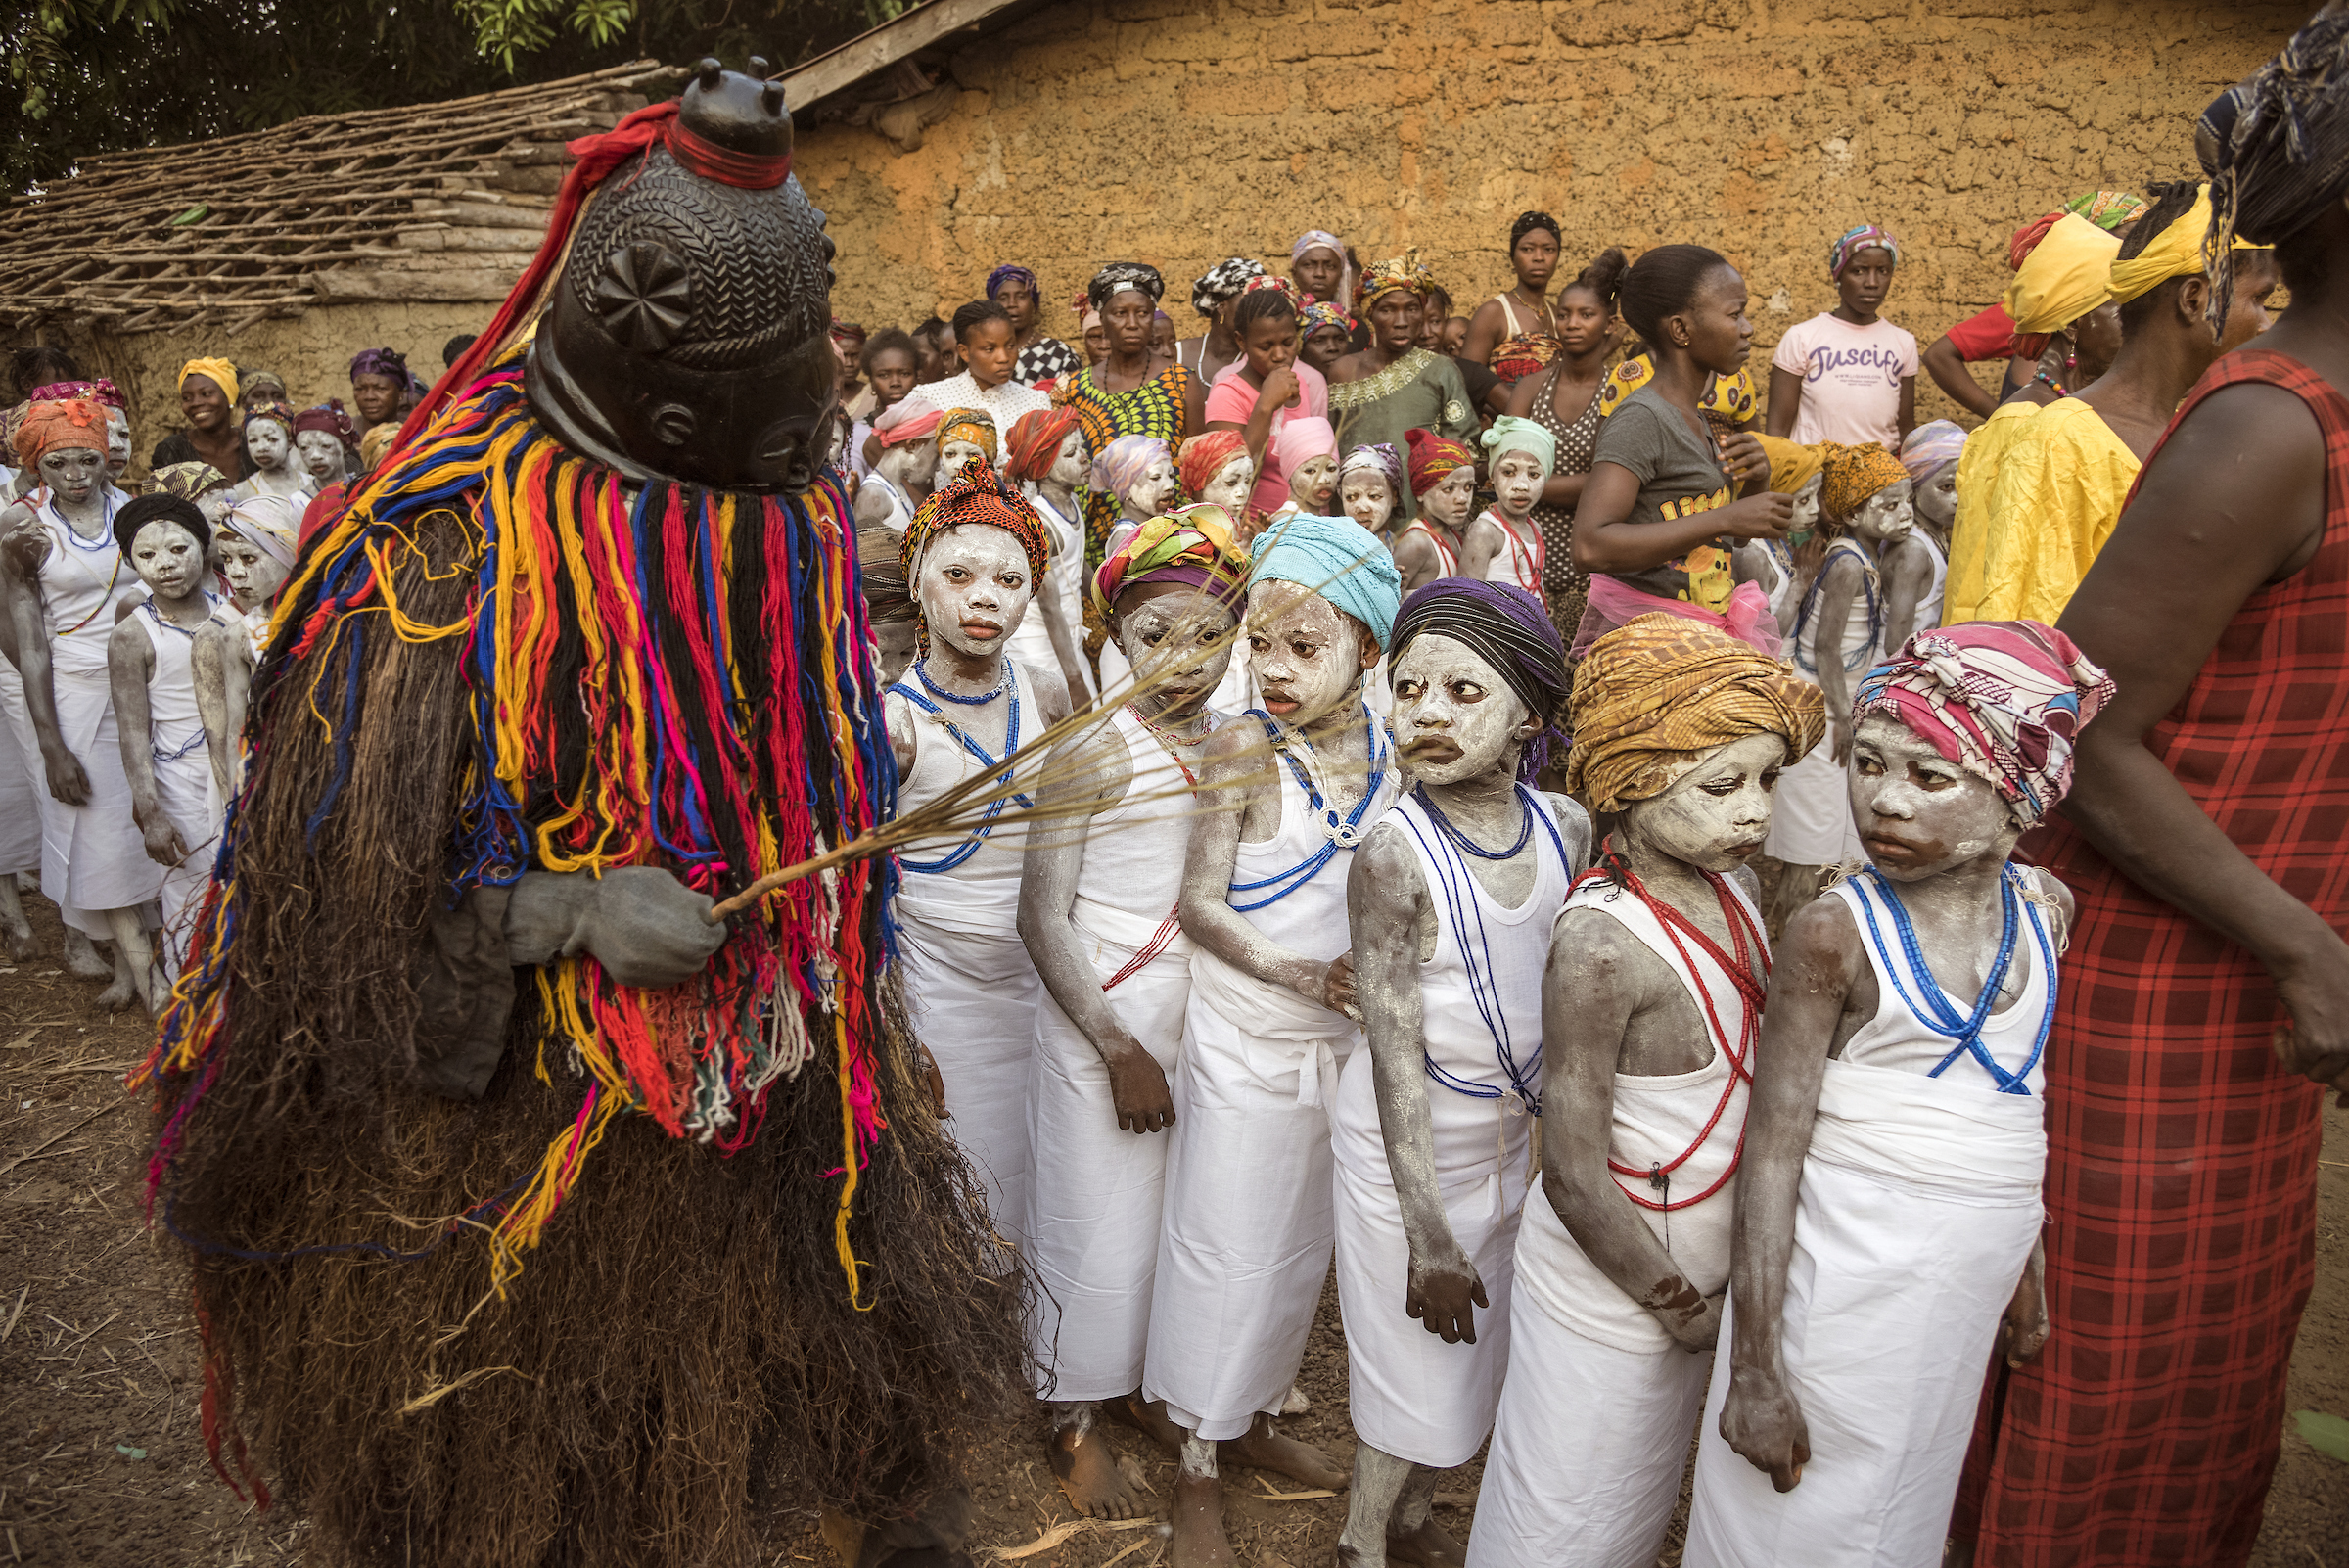 A woman known as the Bondo devil, a high authority in the secret society, participates in the ceremony signifying the community acceptance of this alternative rite of passage.